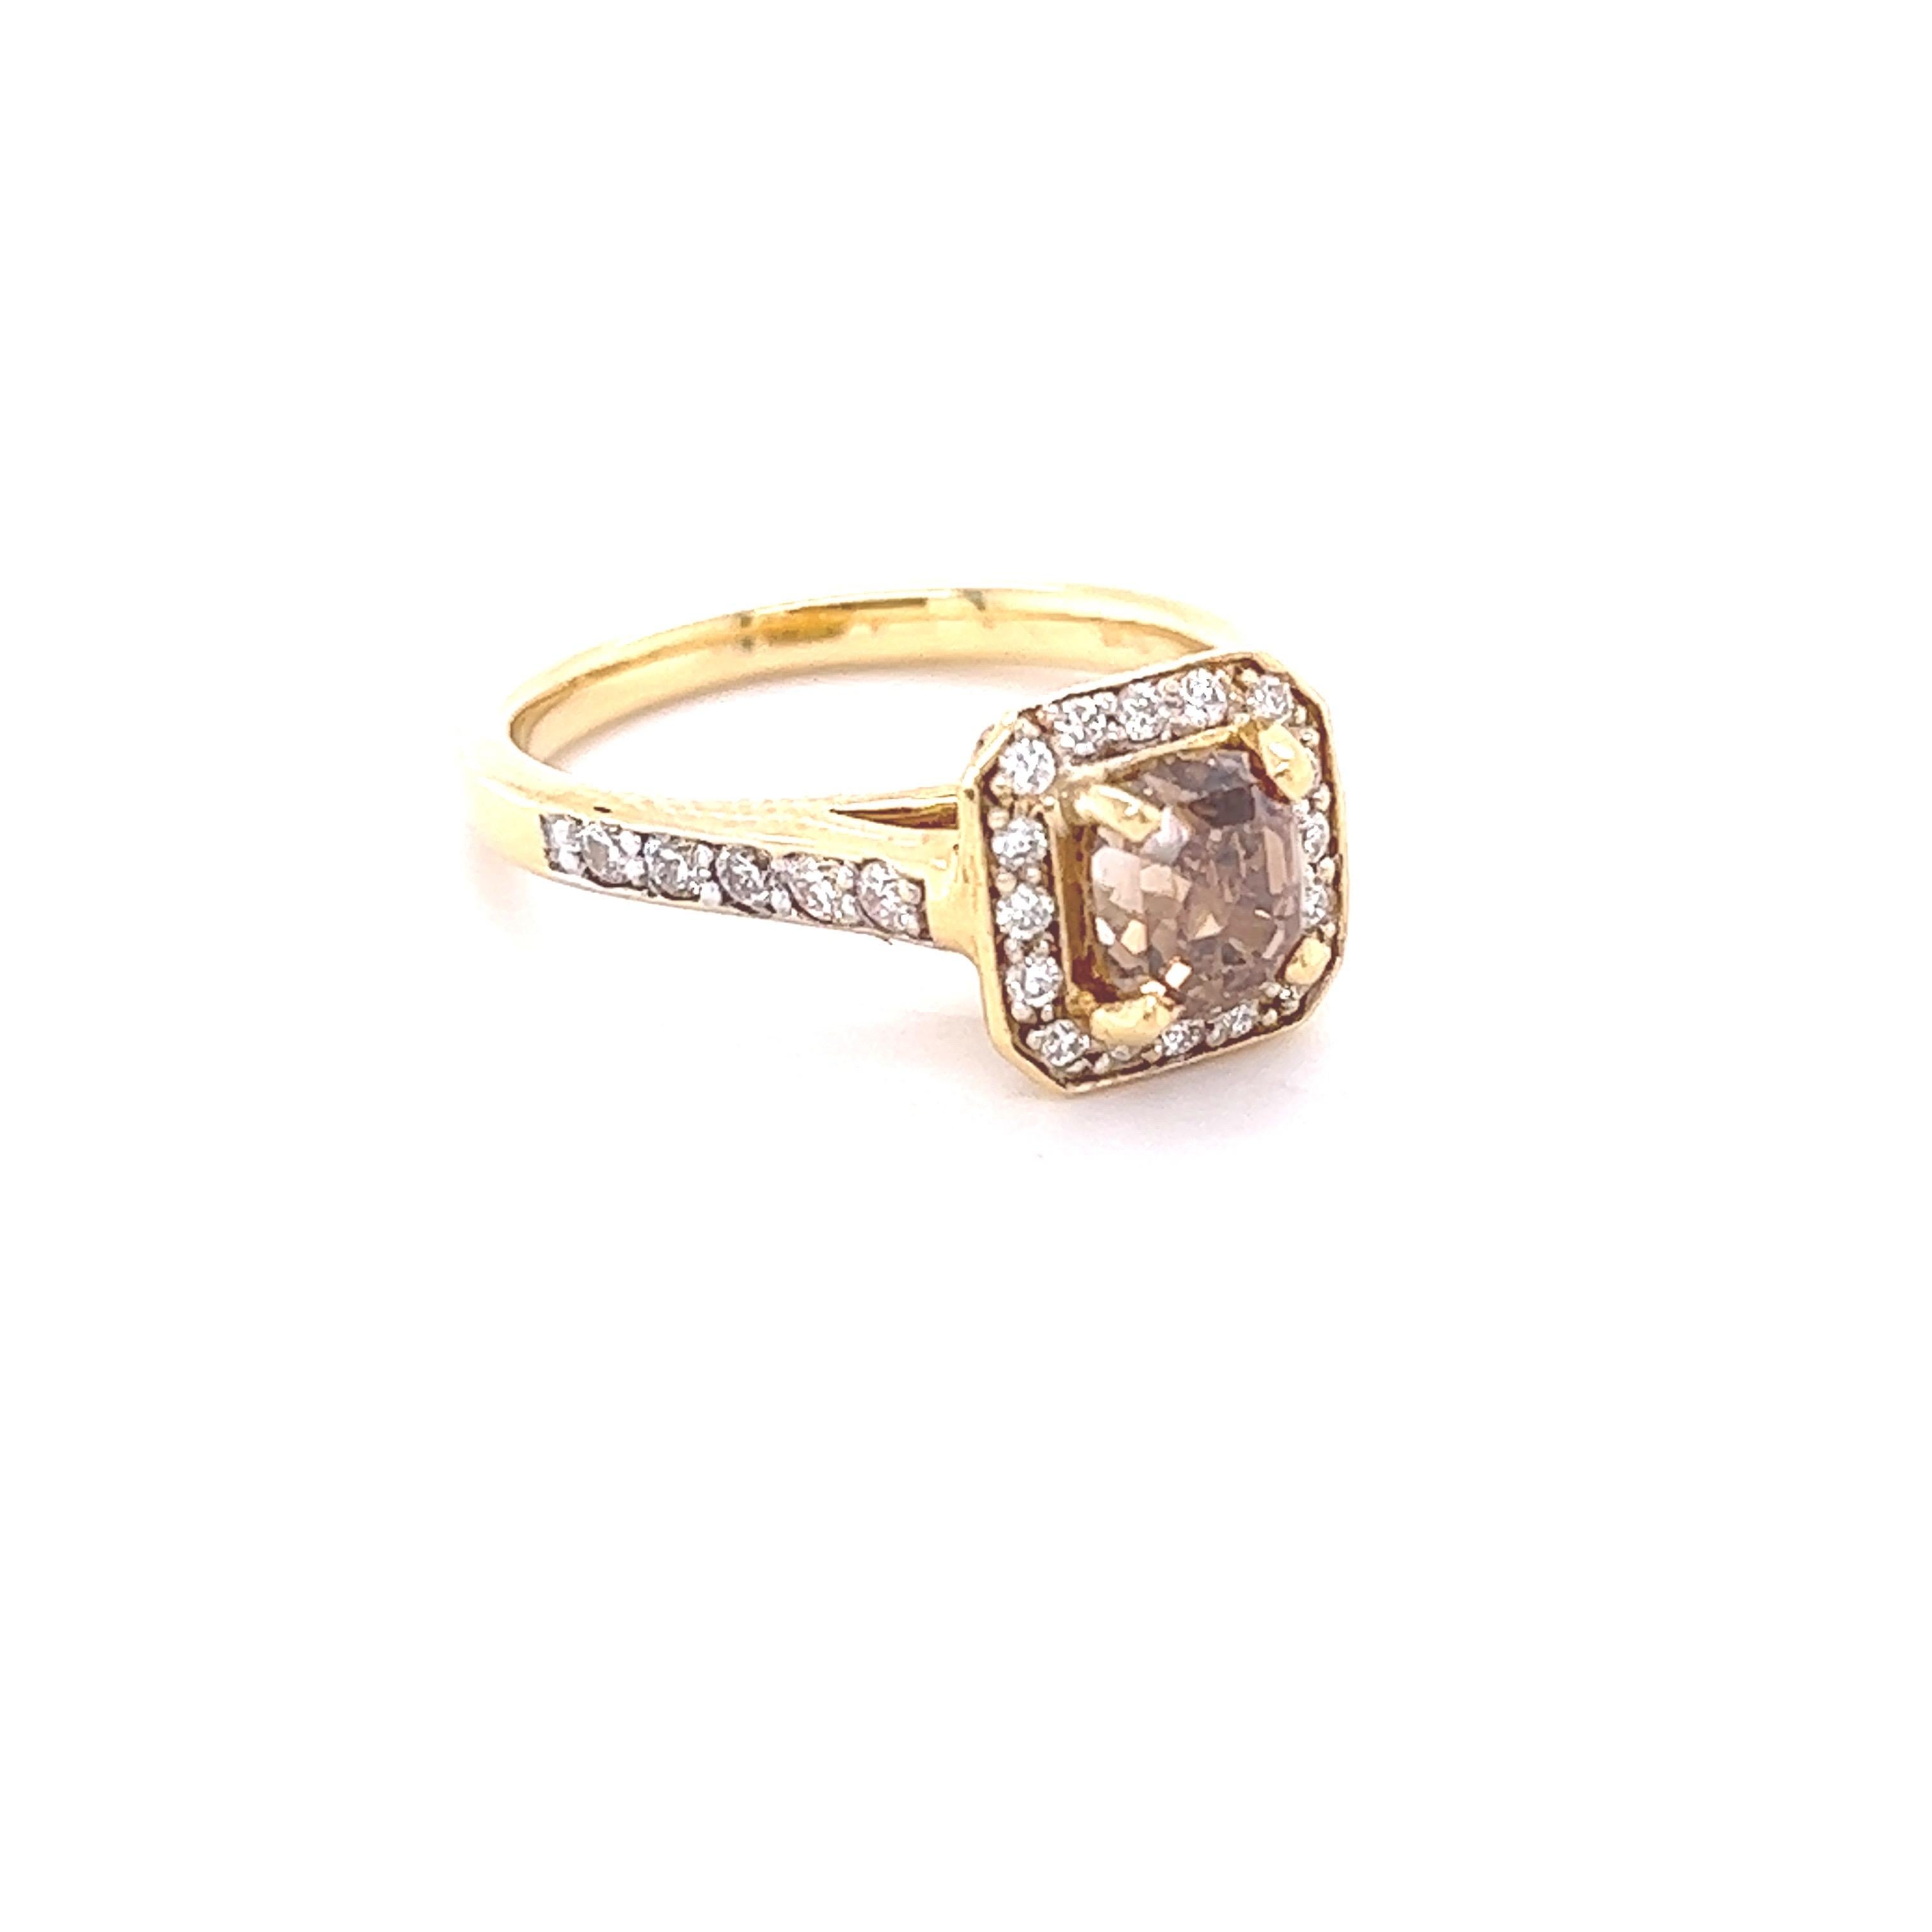 This ring has a Natural Cushion Cut Champagne Brown Diamond that weighs 1.33 carats and it is surrounded by 32 Round Cut White Diamonds that weigh 0.45 carats. Clarity: VS, Color: H
The center champagne diamond measures at 6 mm x 5 mm. 
The total